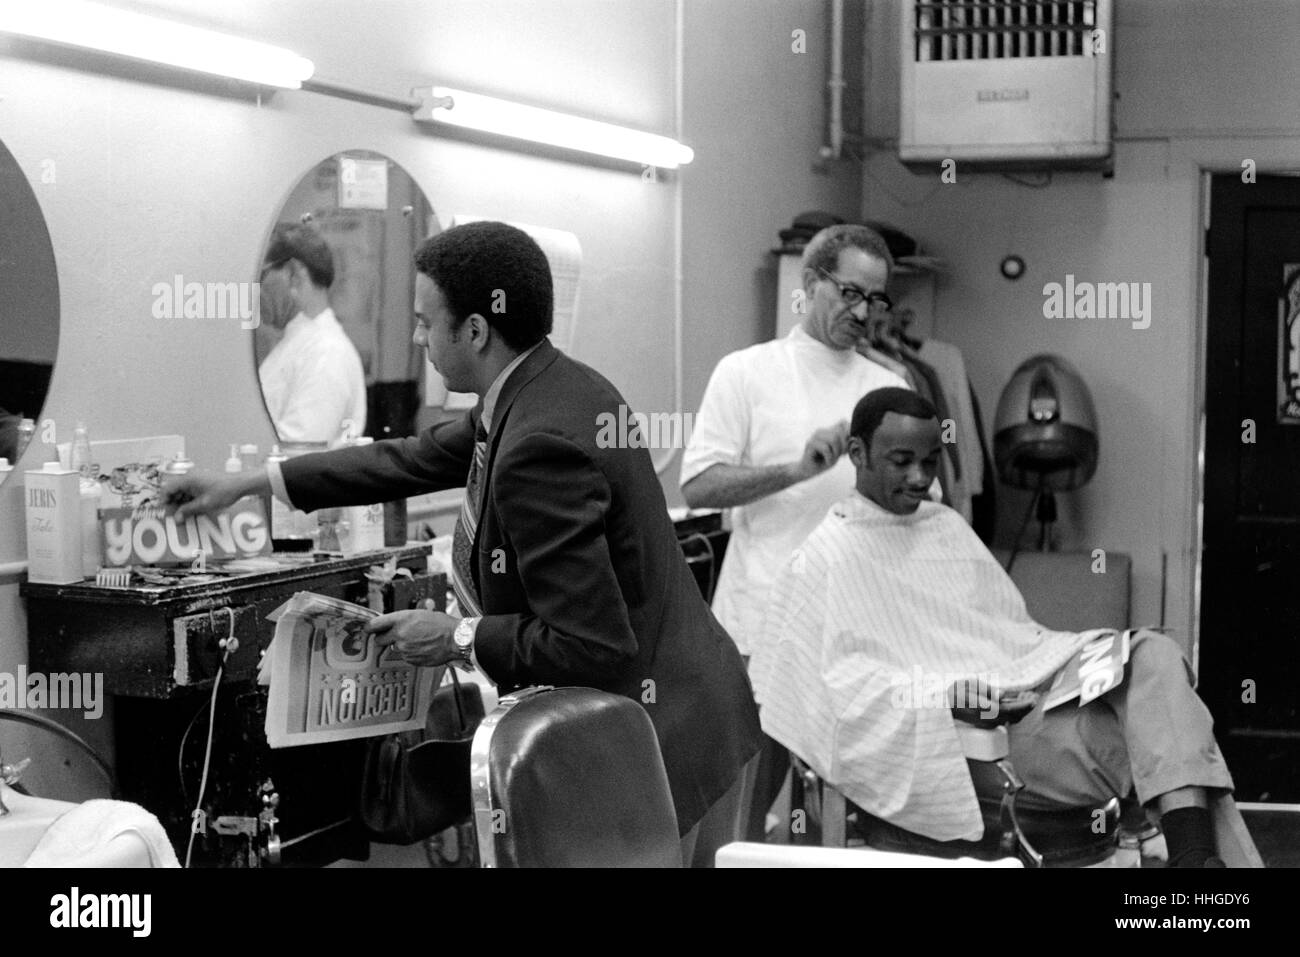 Andrew J. Young - who would later become mayor of Atlanta and U.S. Ambassador to the United Nations - stumps for votes at an Atlanta barber shop during his bid for Congress in 1970 from Georgia's 5th Congressional district. Andrew Jackson Young, born March 12, 1932, is an American politician, diplomat, activist and pastor from Georgia. He has served as a Congressman from Georgia's 5th congressional district, the United States Ambassador to the United Nations, and Mayor of Atlanta. Stock Photo